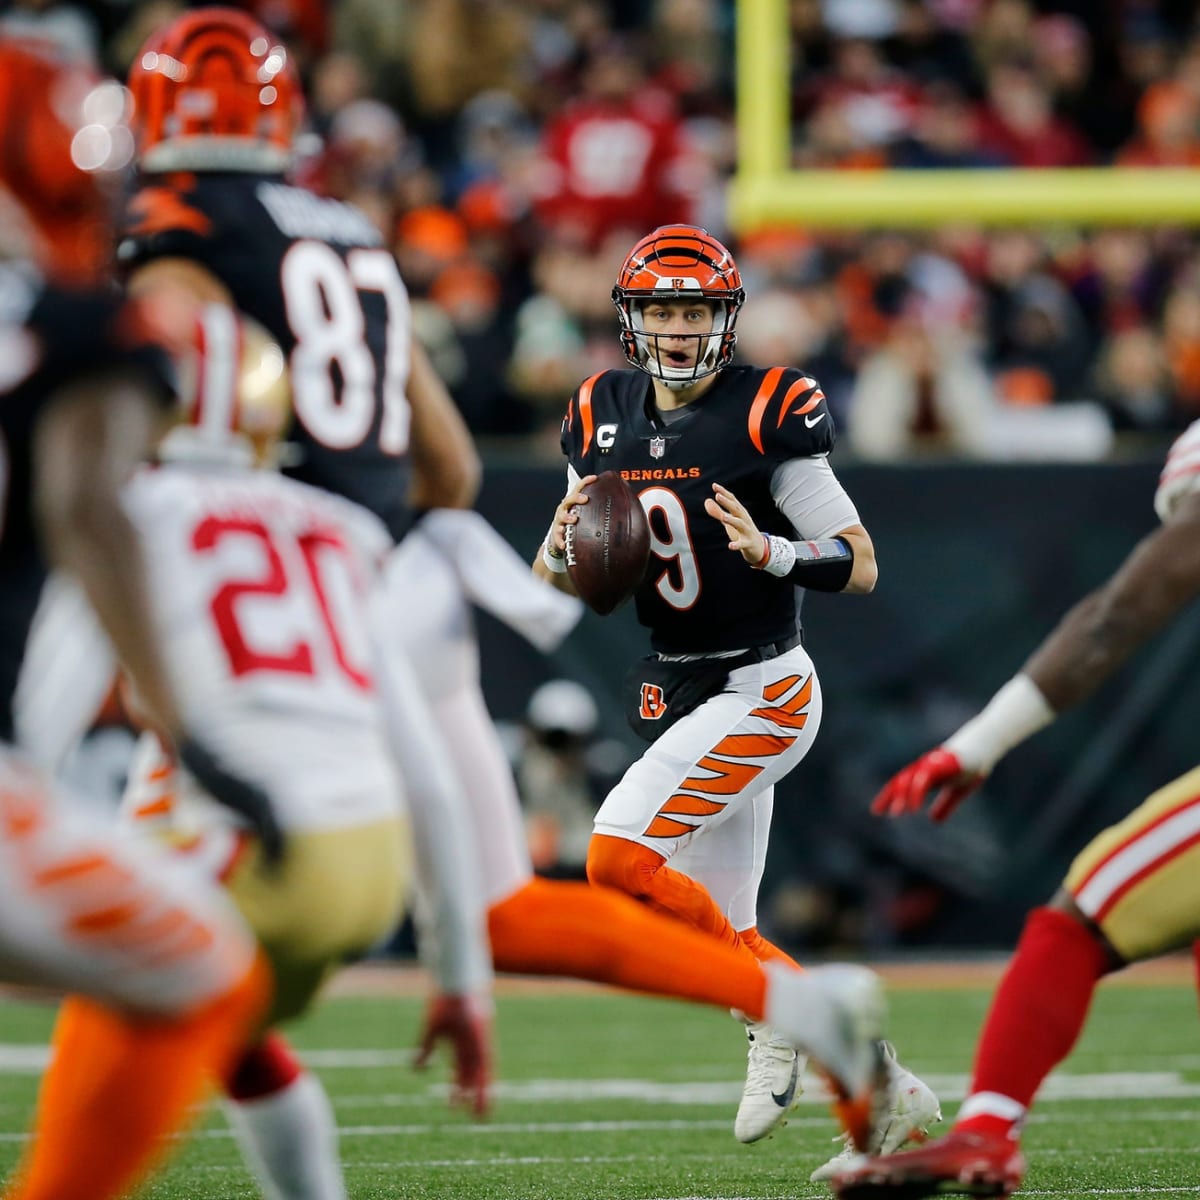 Bengals vs 49ers final score, recap and more from wild OT game in